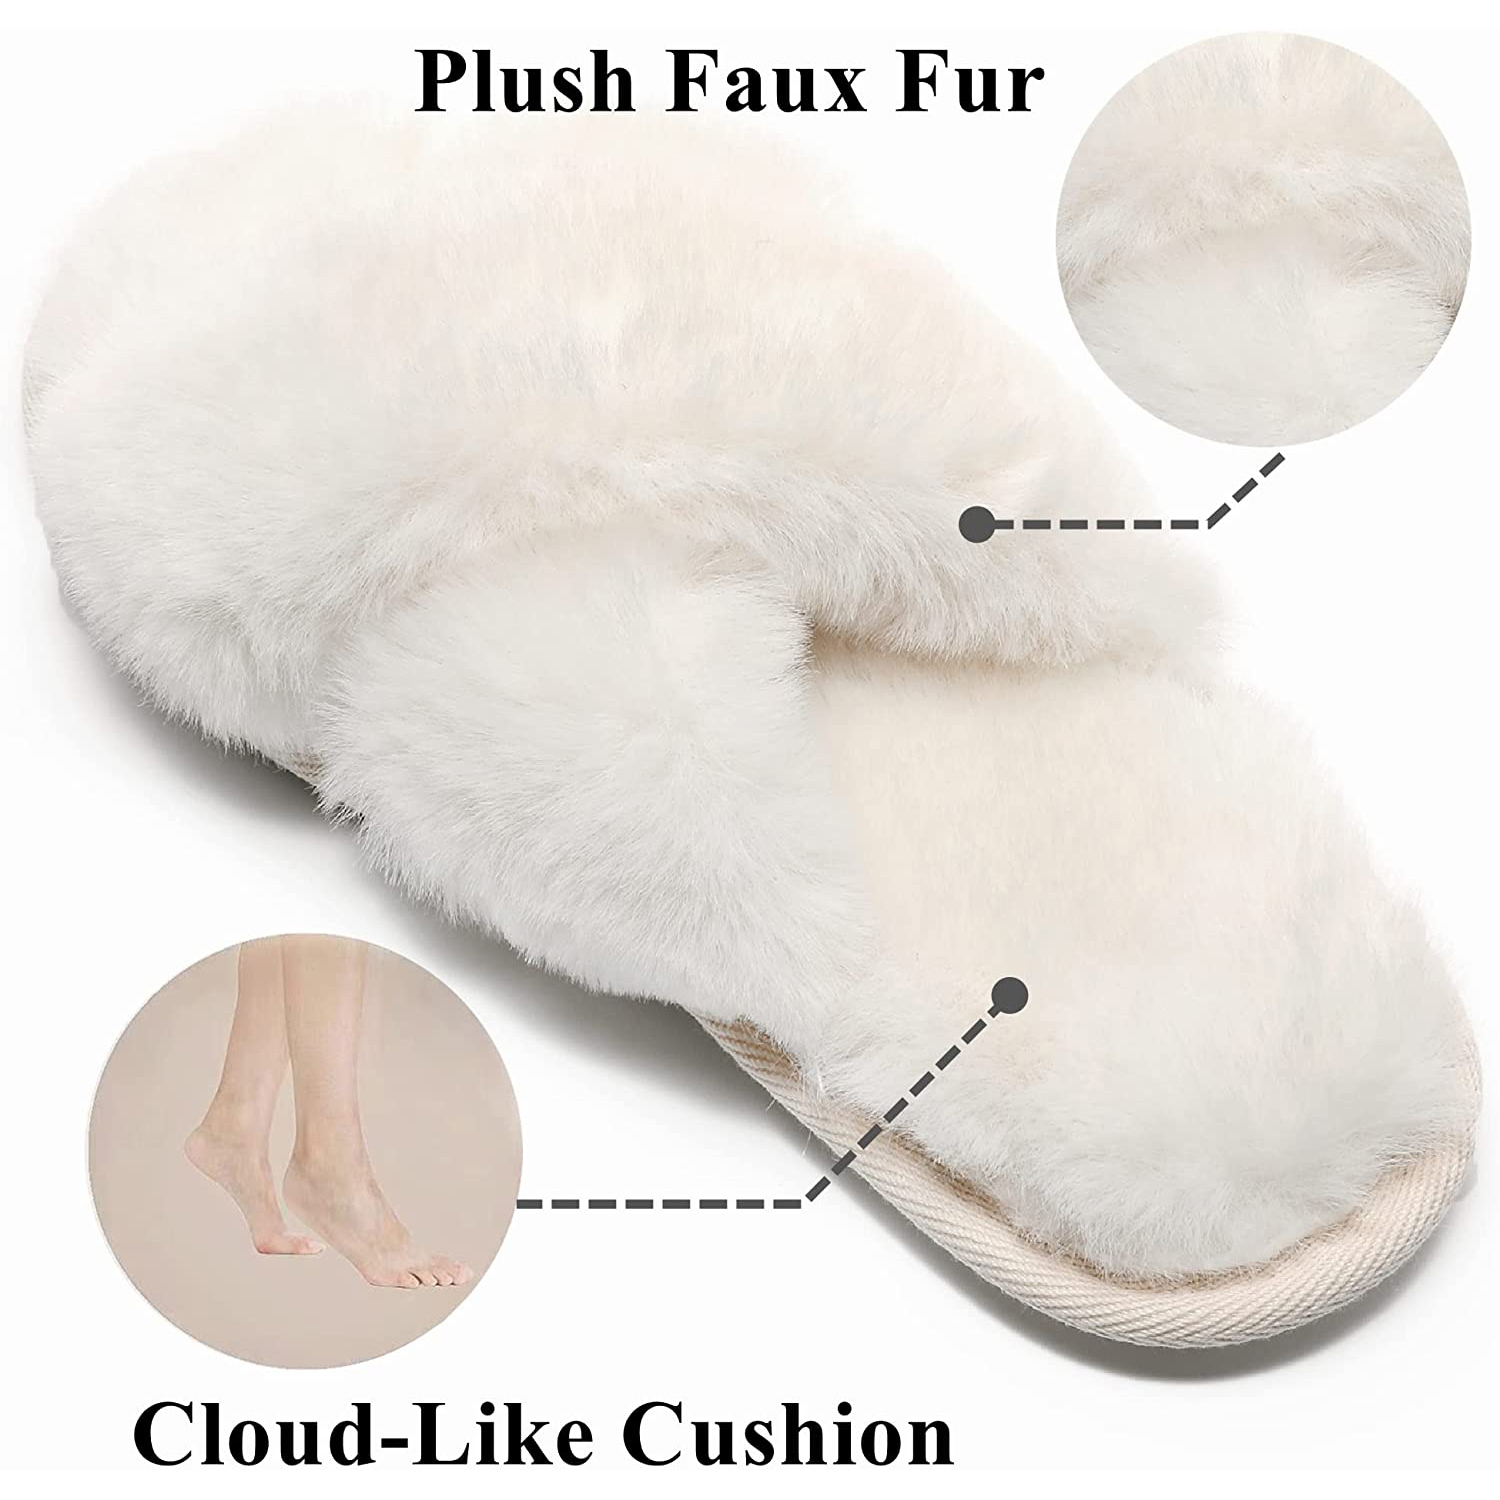 Women's Cross Band Slippers Soft Plush Furry Cozy Open Toe House Shoes Indoor Outdoor Faux Rabbit Fur Warm Comfy Slip On Breathable - image 4 of 7